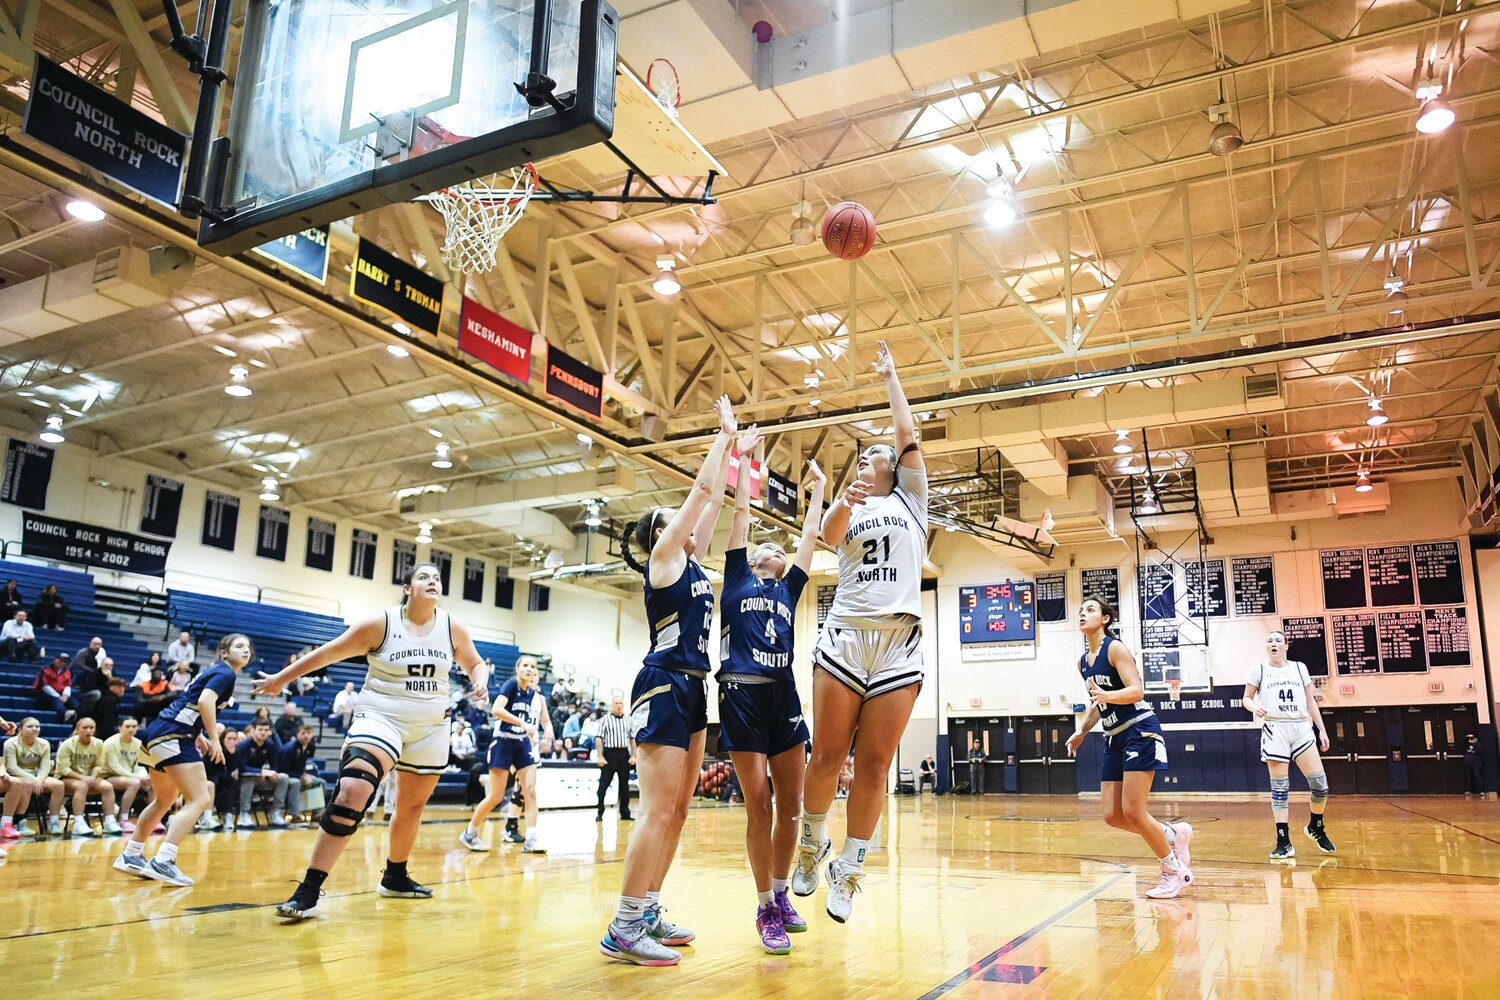 Council Rock North’s Delaney McCaffery launches a hook shot over the double team of Council Rock South’s Fiona Reckner and Lily Bross.